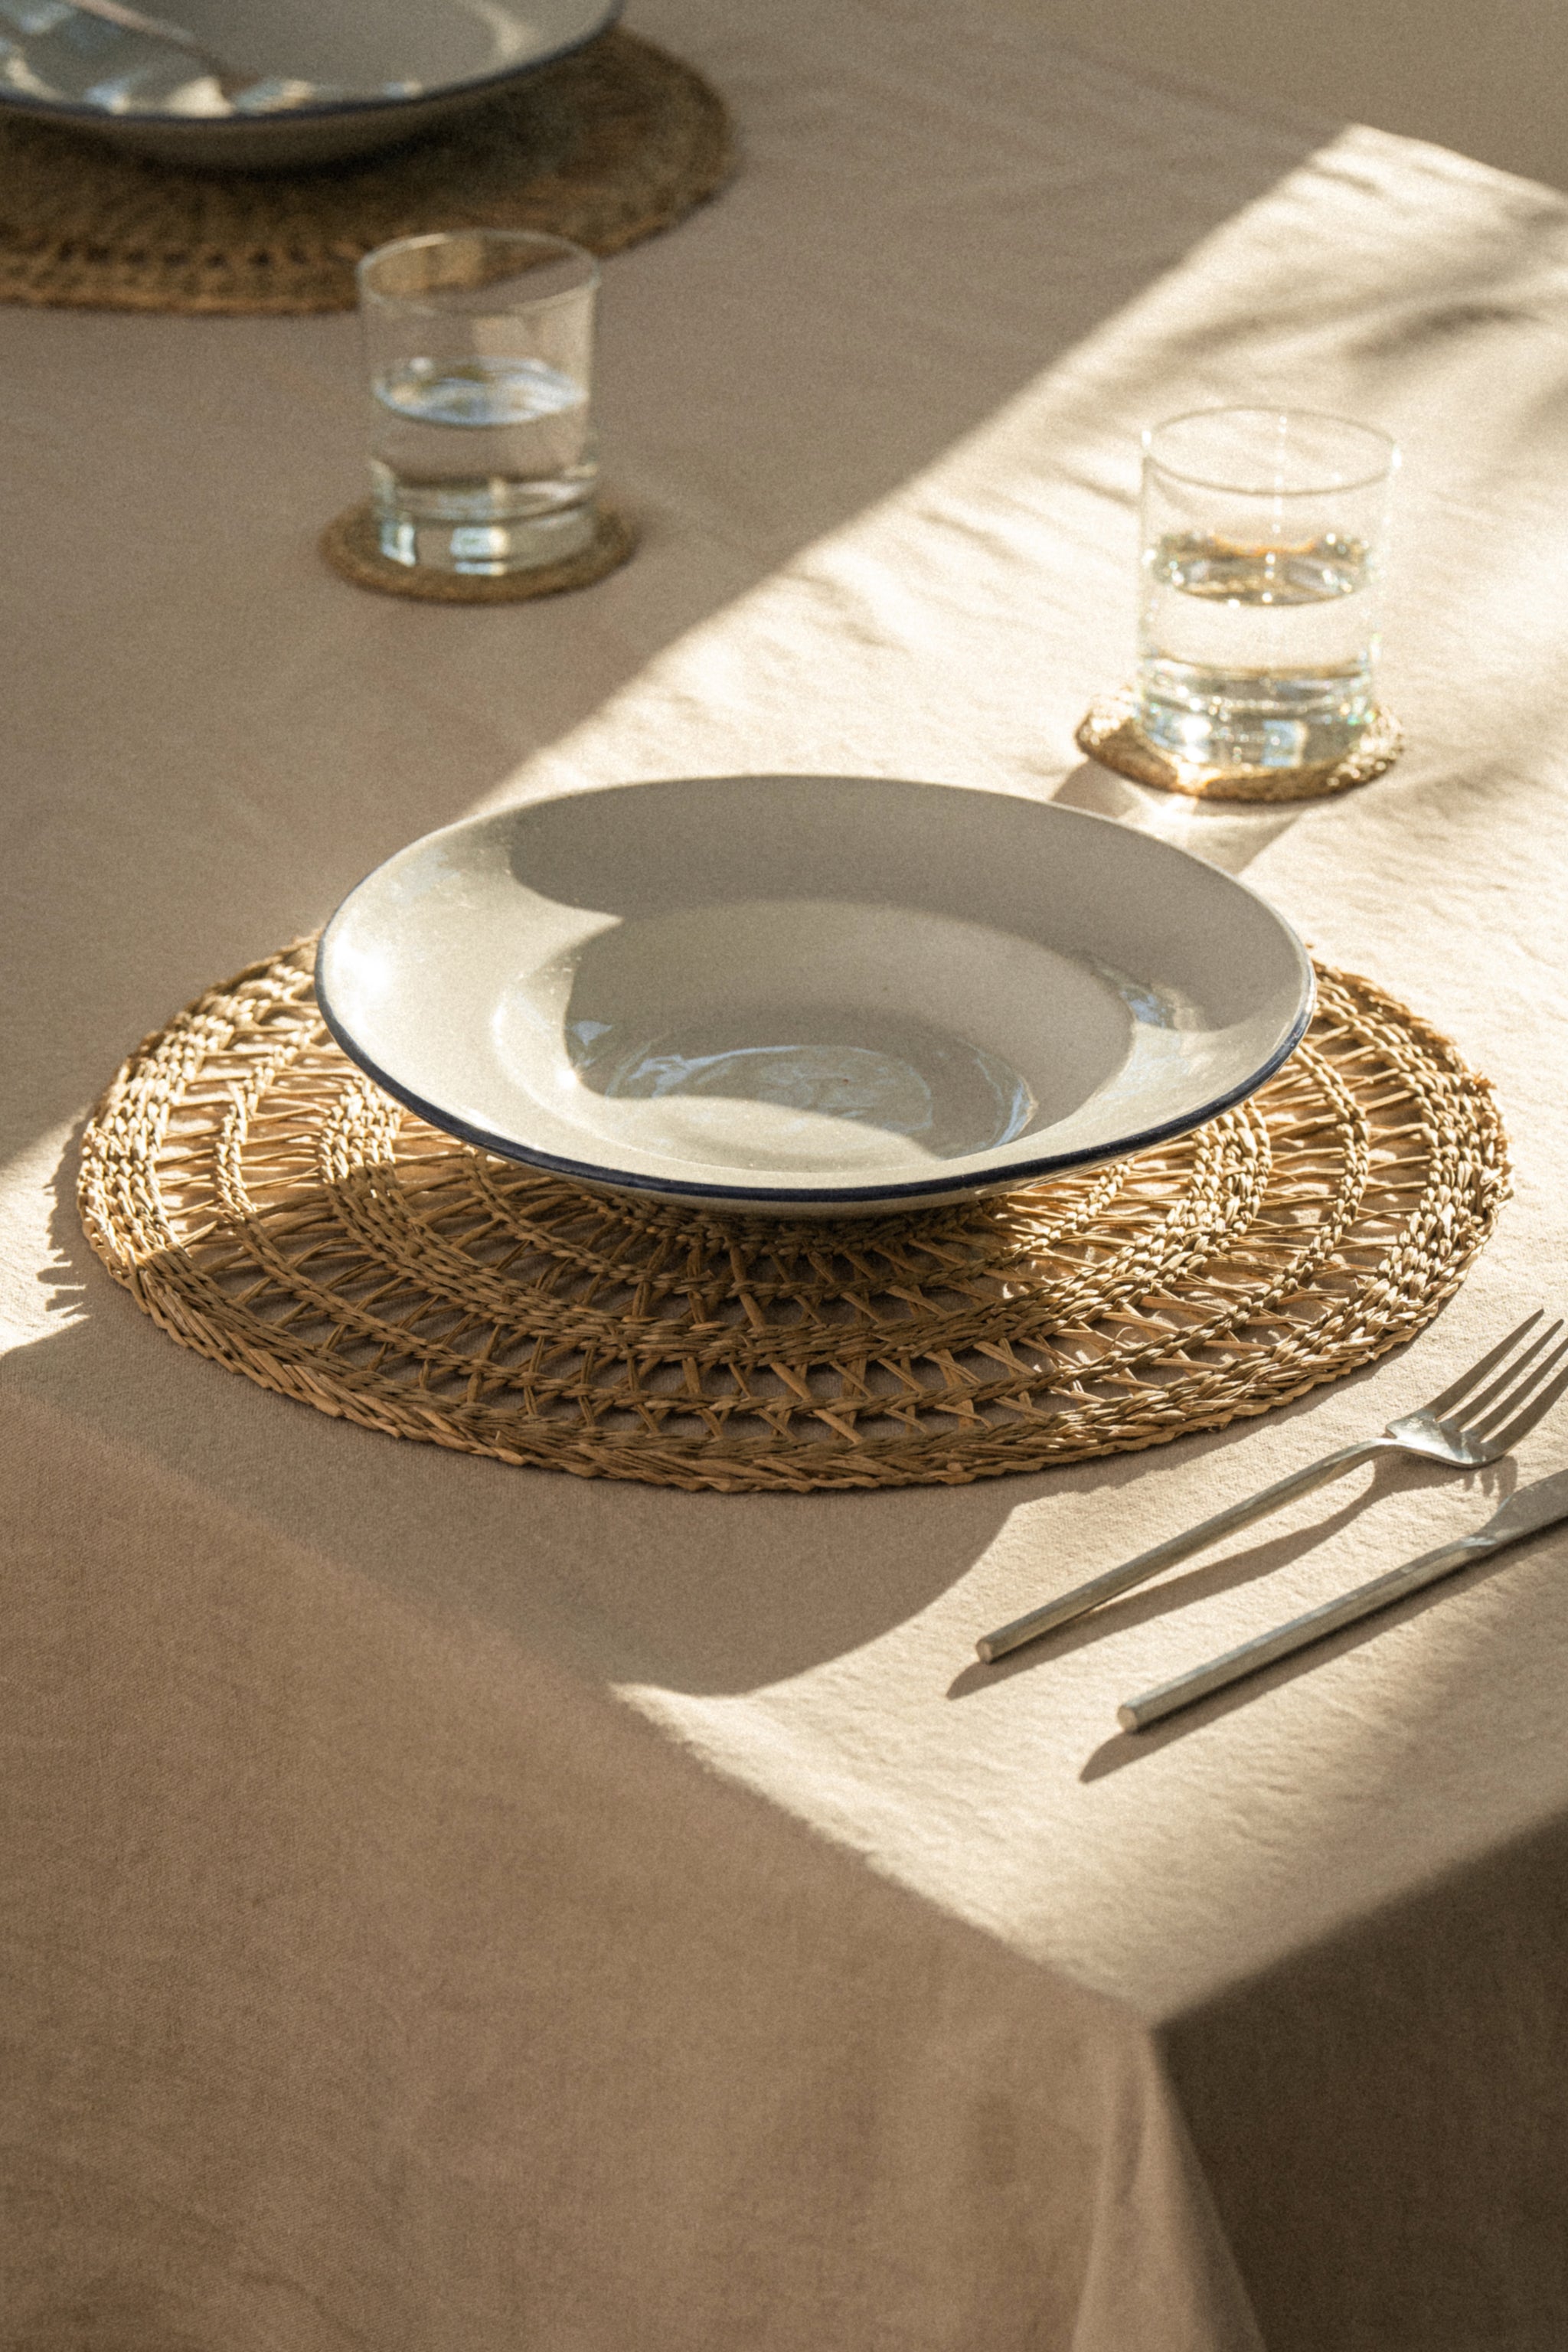 Raya Lattice Woven Seagrass Placemats (Set of 2) - featured